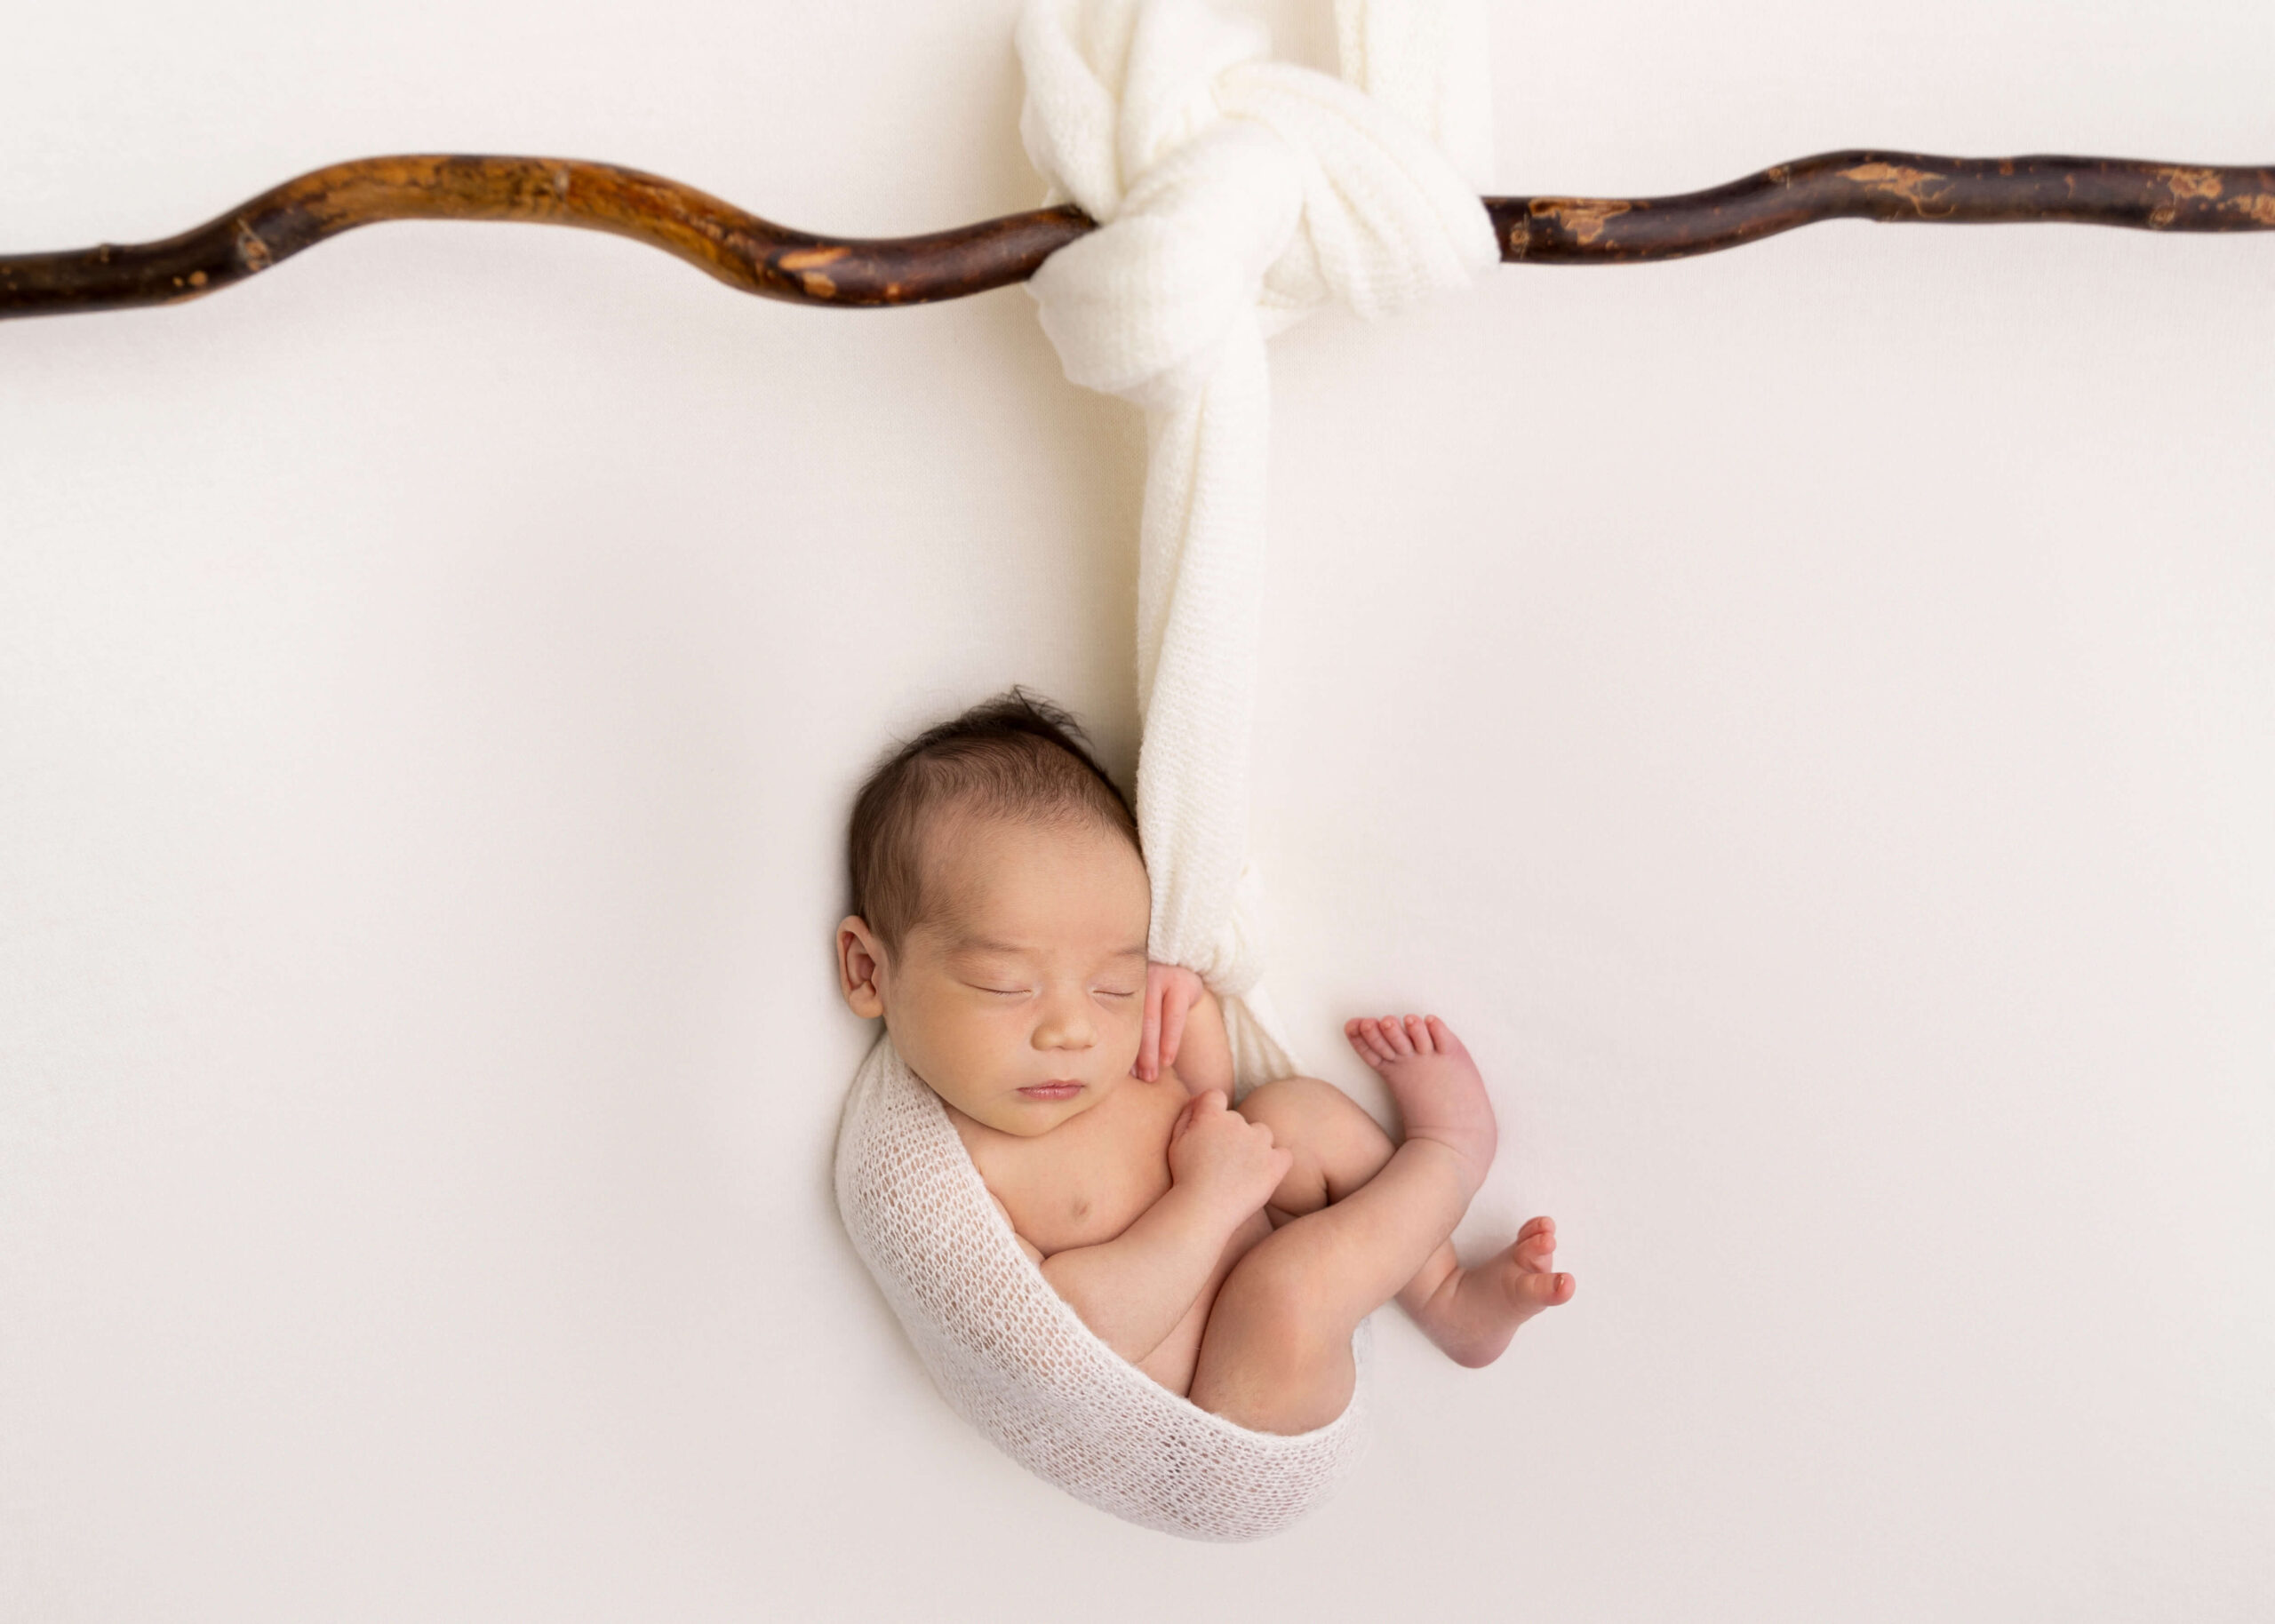 Baby posed in studio on beanbag hanging by a branch while being spotted by an assistant.